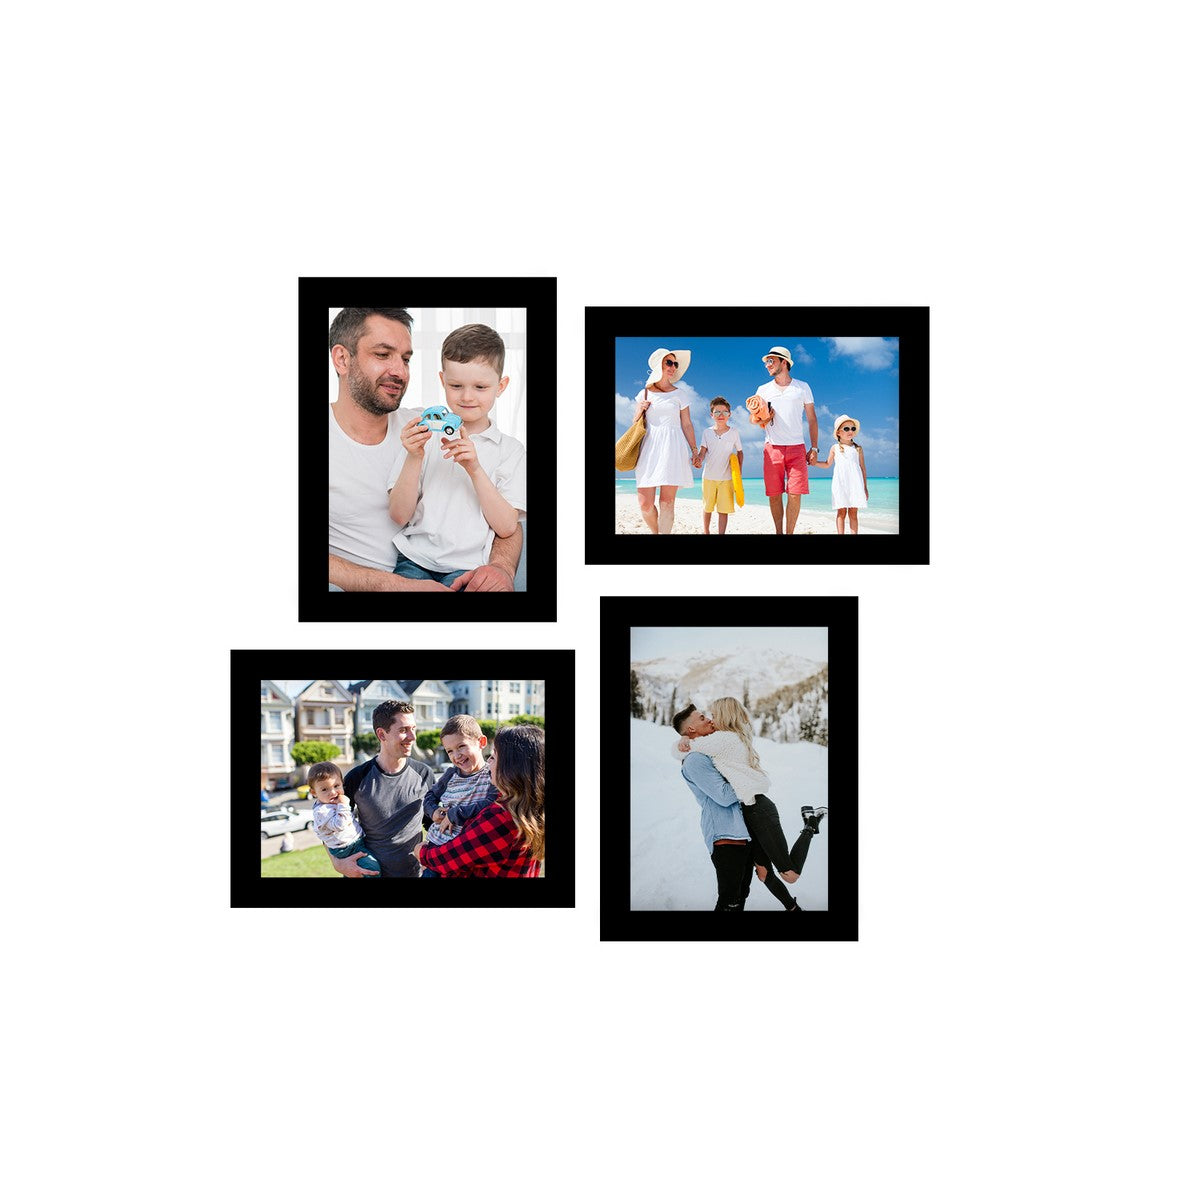 Memory Wall Collage Photo Frame - Set of 4 Photo Frames for 4 Photos of 6"x8"